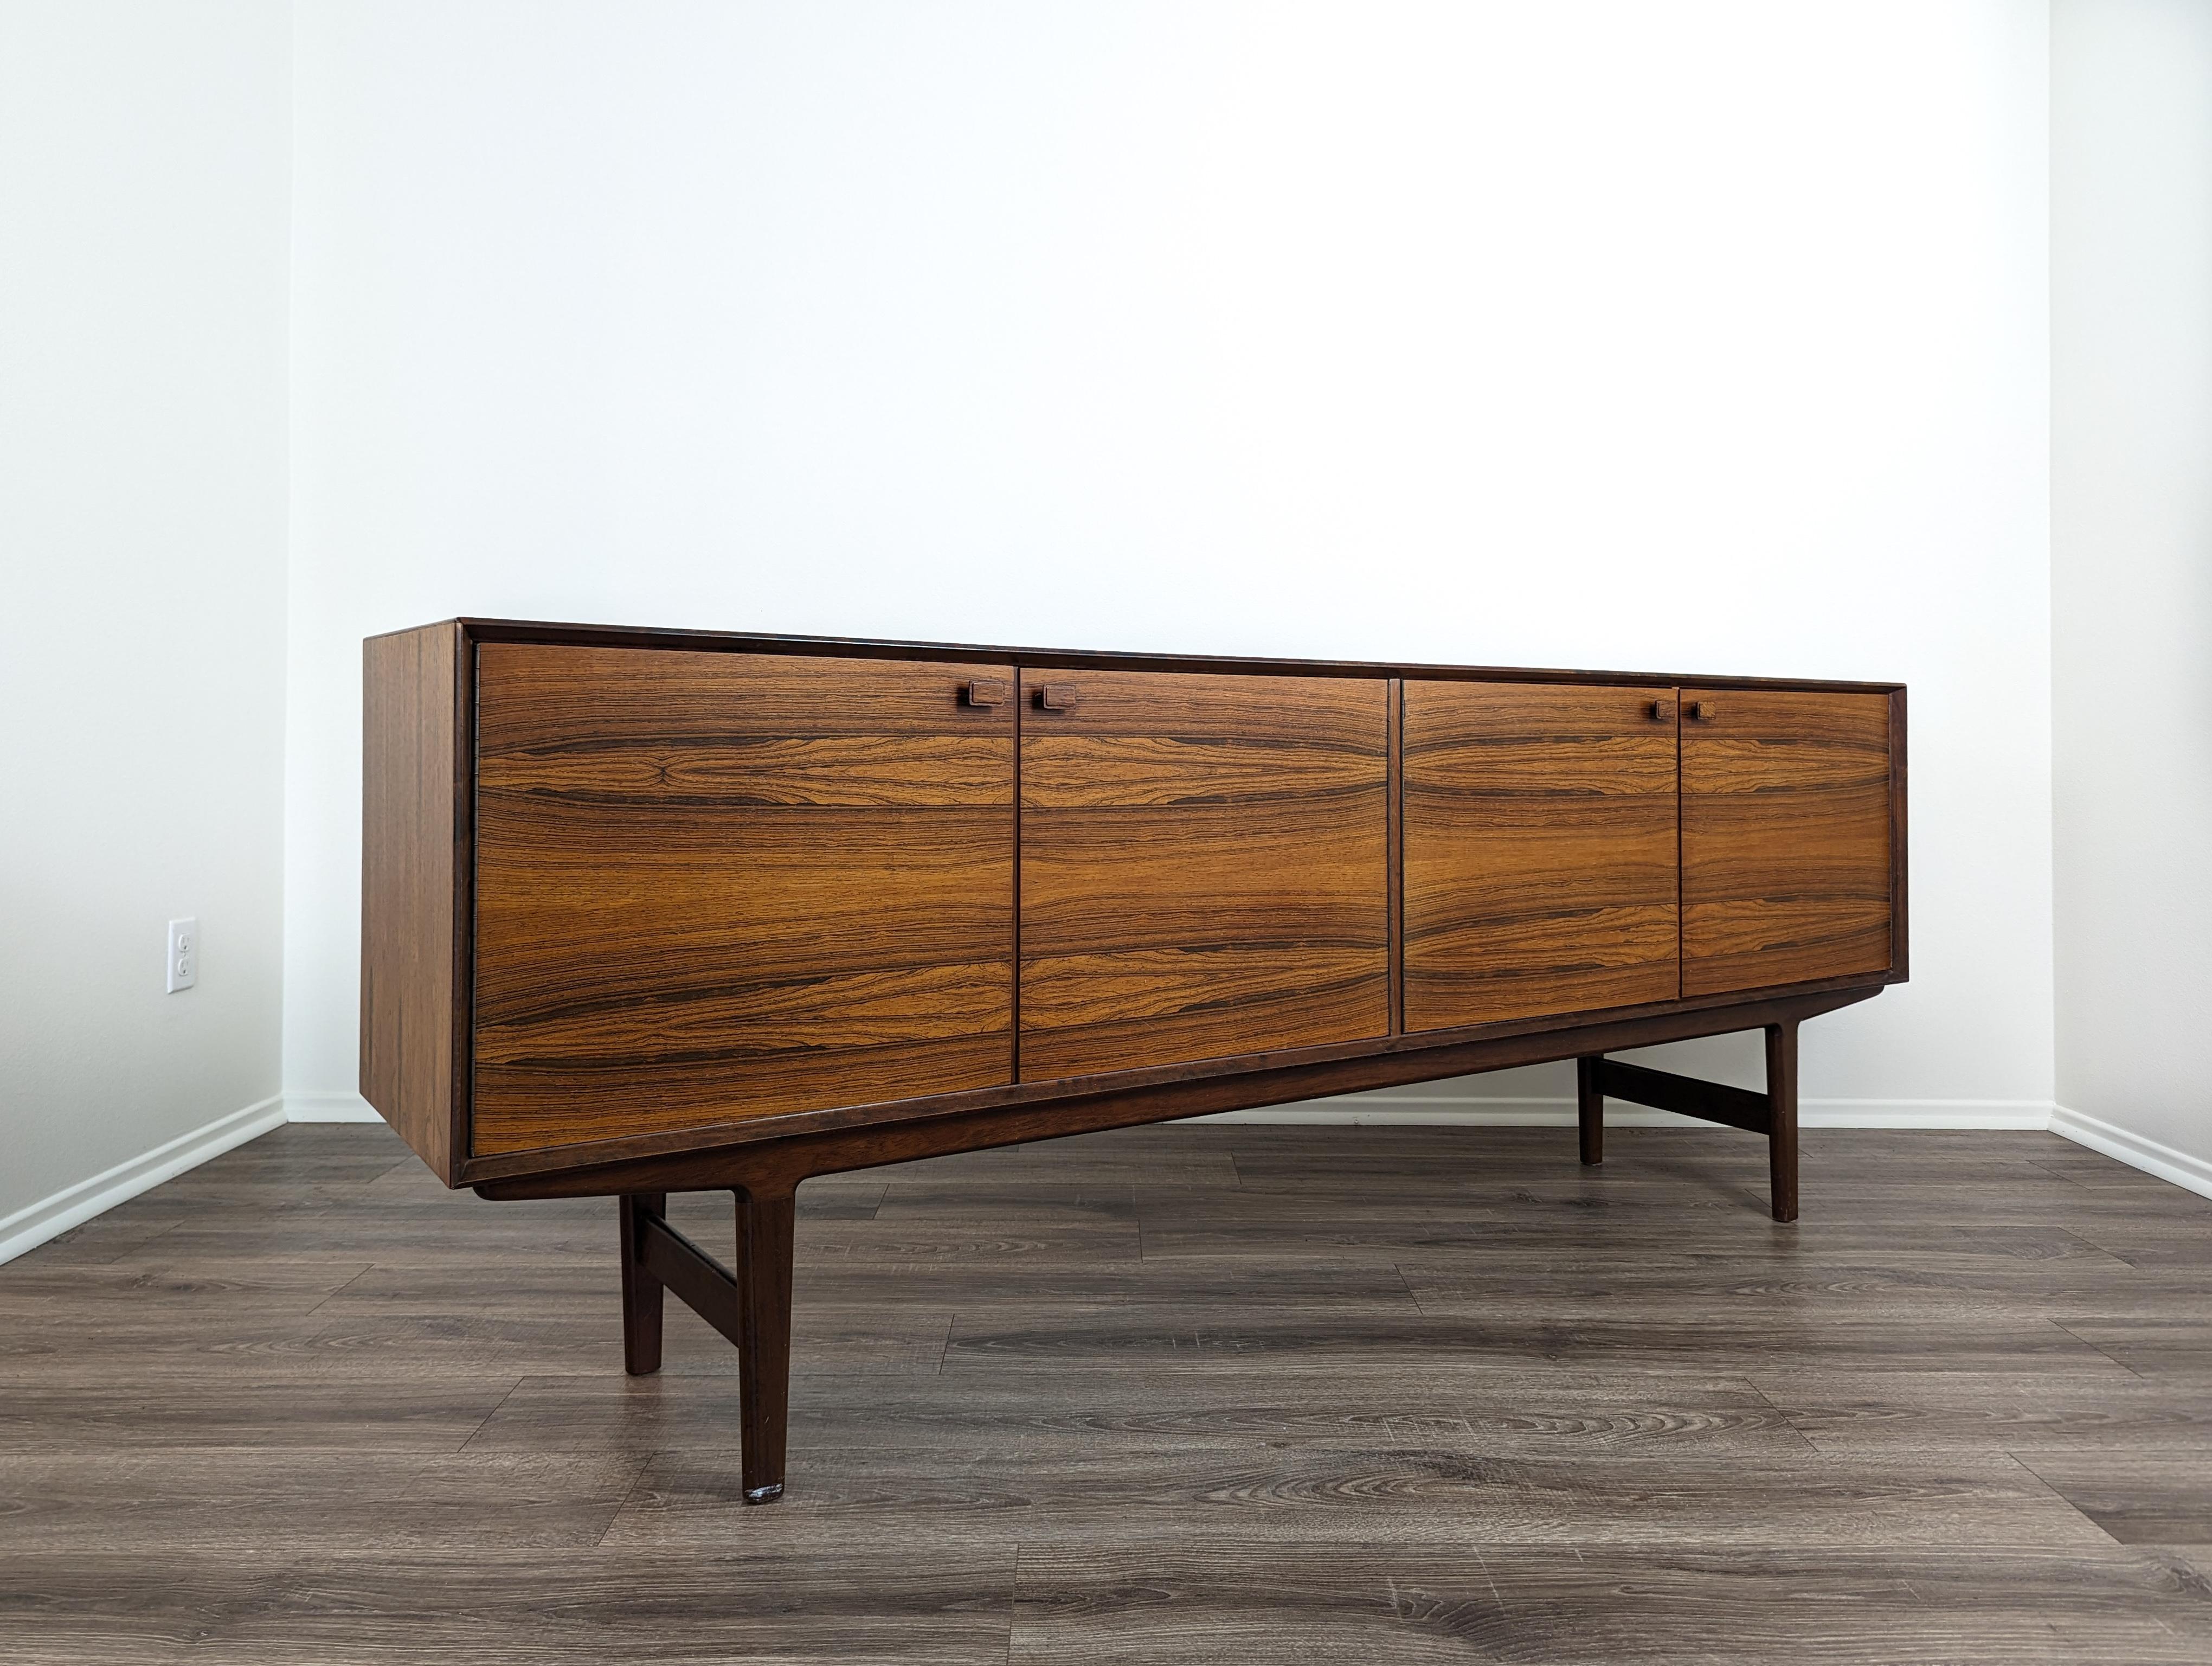 Delight in the flawless fusion of form and function with this exquisite Mid-Century Modern Rosewood Credenza designed by the legendary Fredrik Kayser. Crafted with meticulous precision, this stunning piece embodies the iconic minimalism and refined